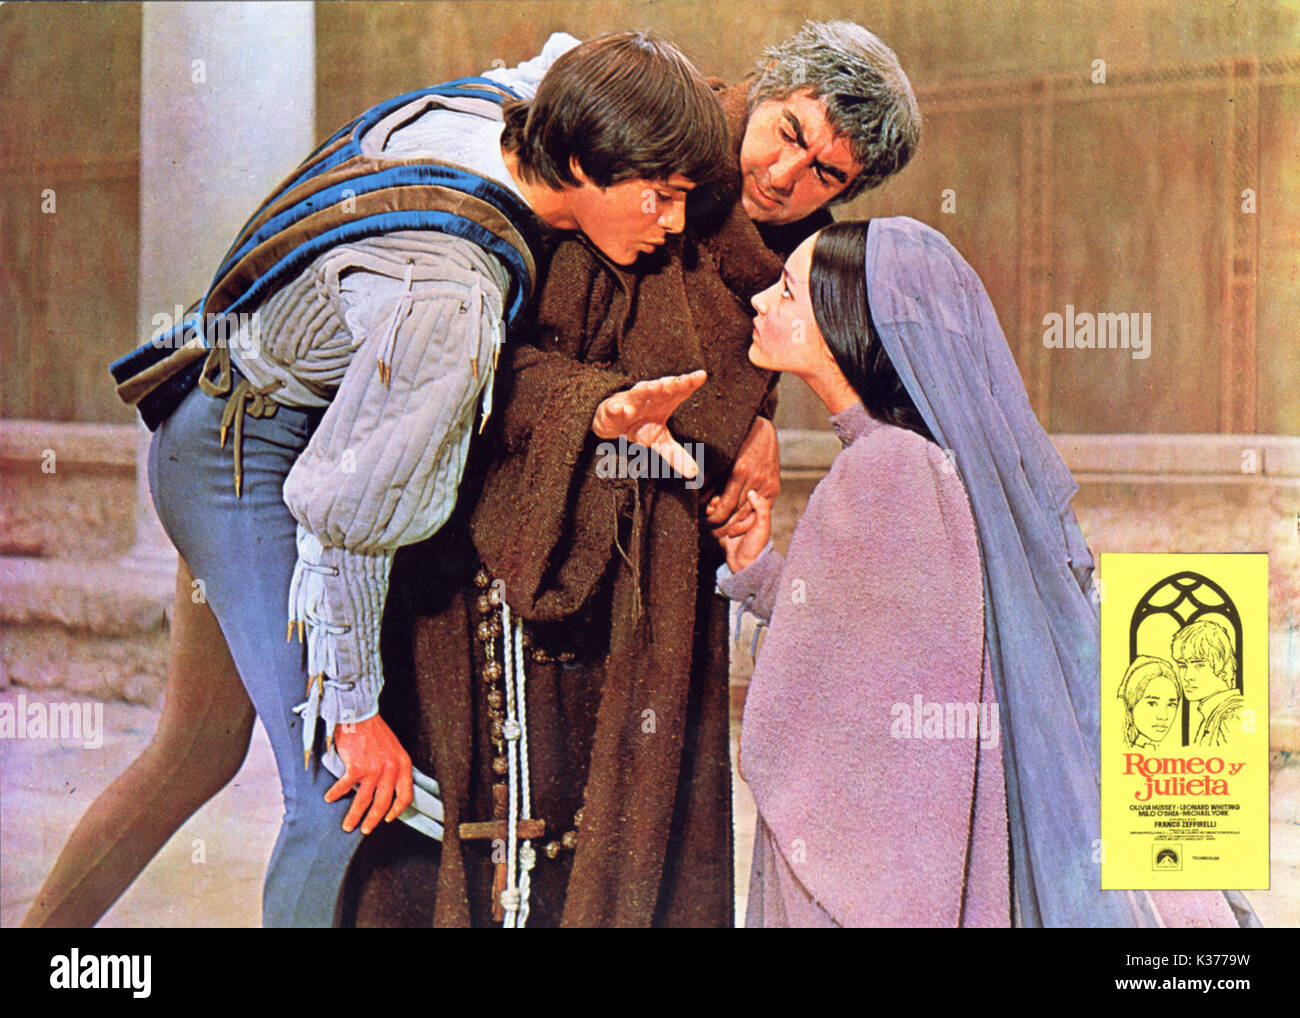 ROMEO AND JULIET [Br/ITALY 1968] LEONARD WHITING, MILO O'SHEA AND OLIVIA HUSSEY  A PARAMOUNT PICTURE     Date: 1968 Stock Photo